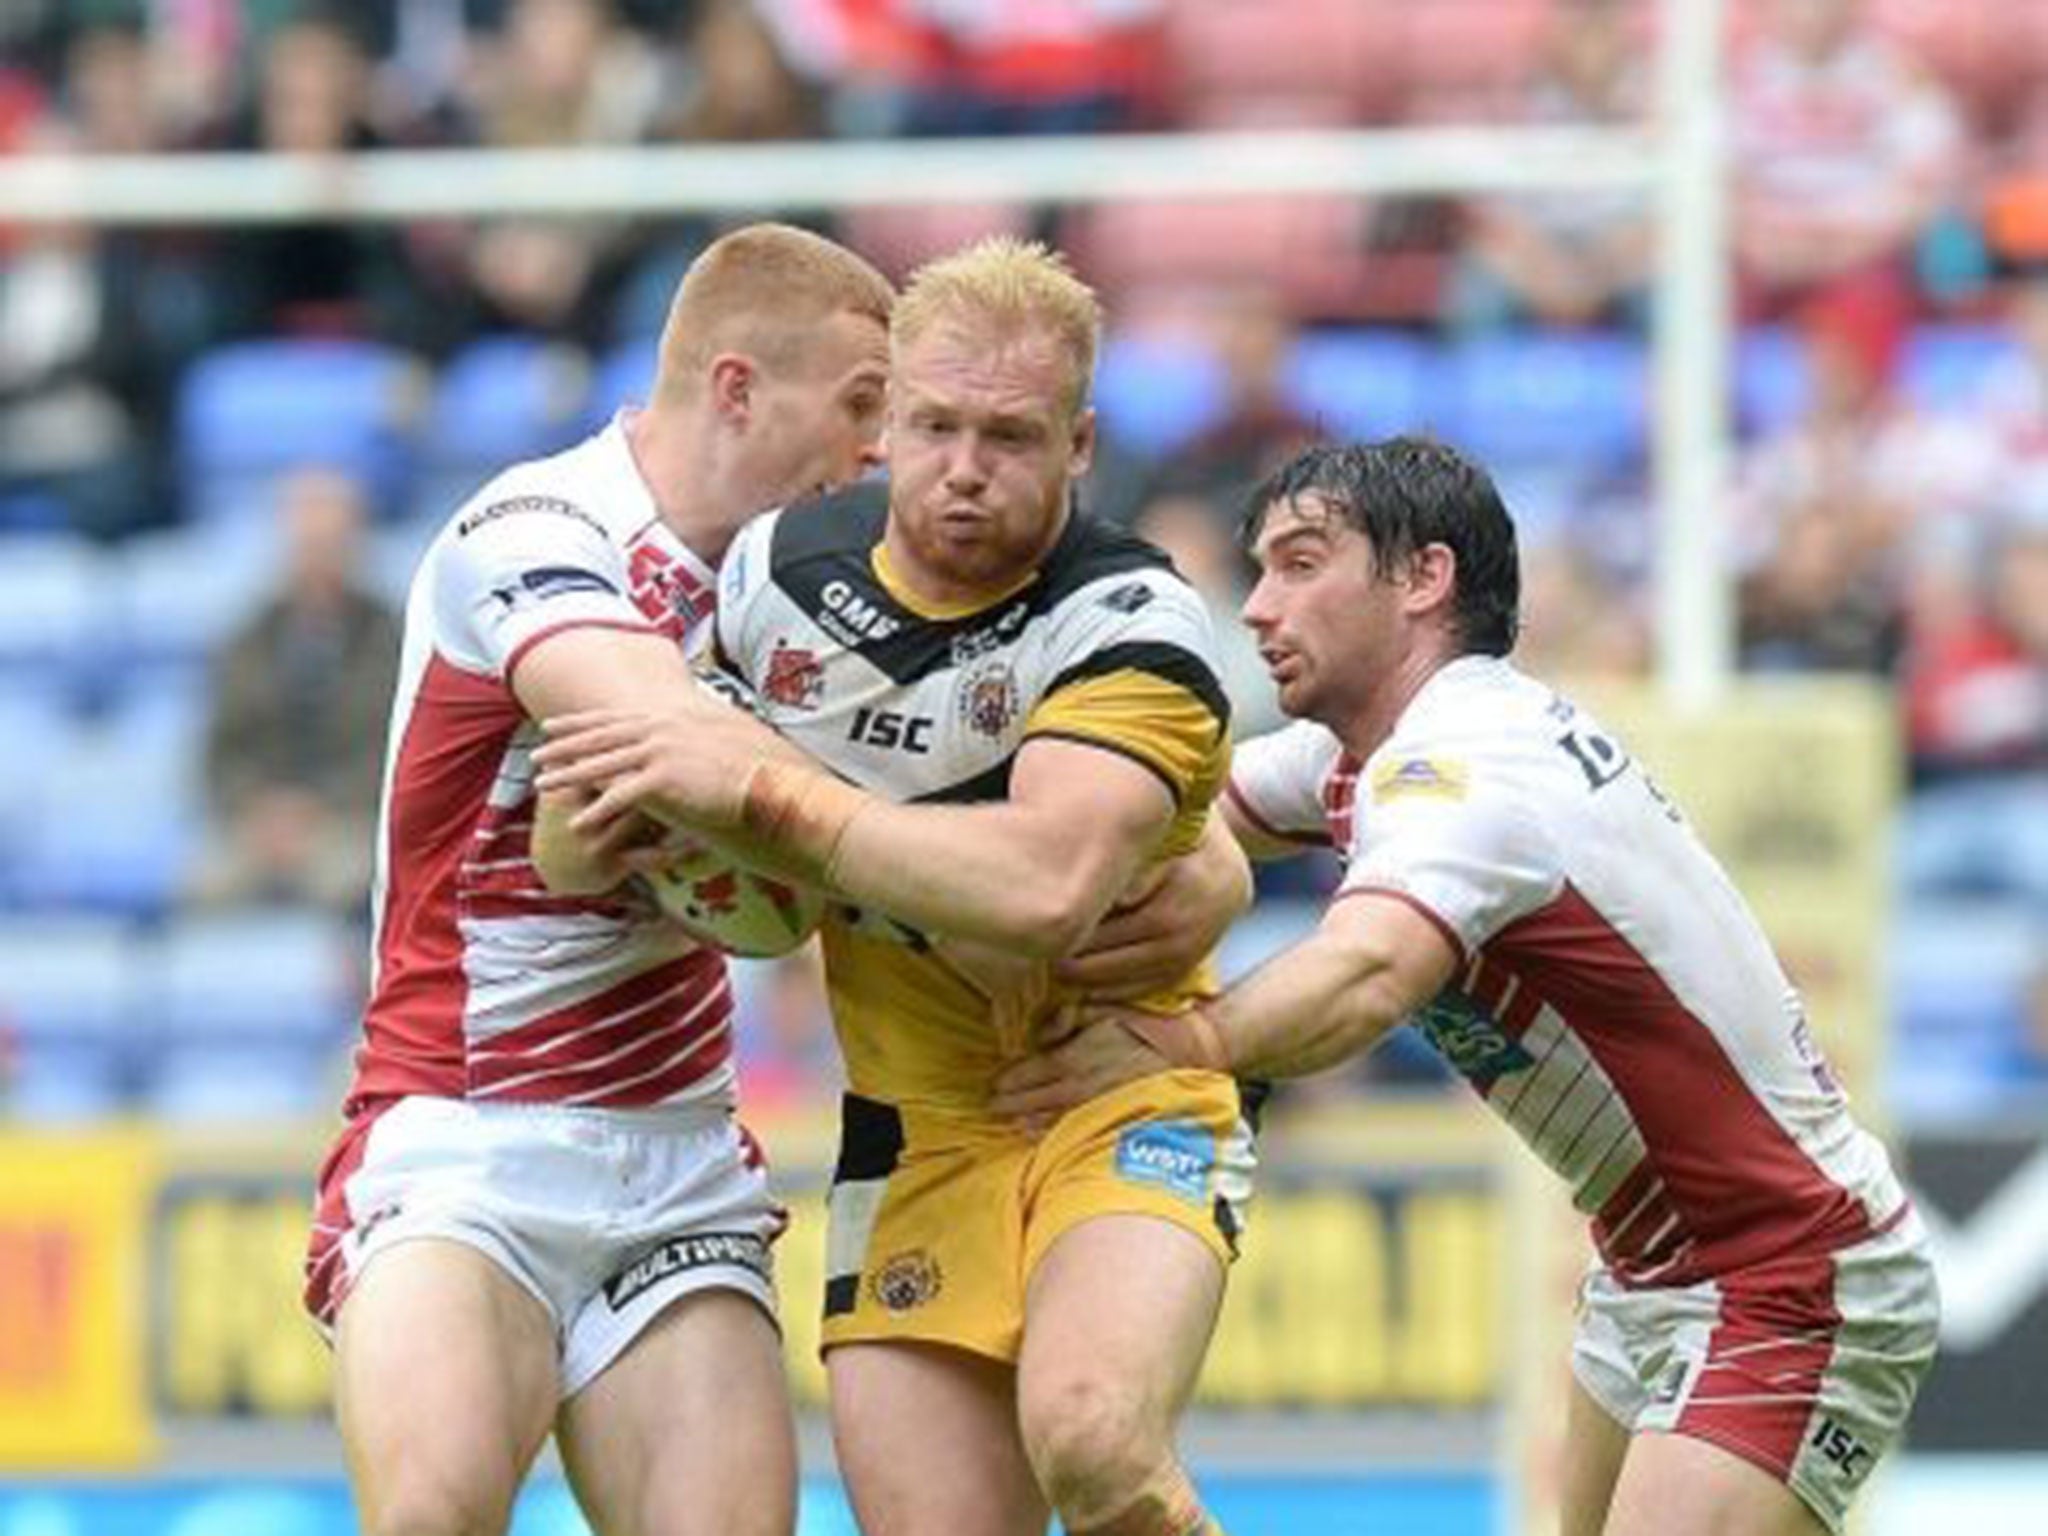 Castleford Tigers' Oliver Holmes is tackled by Wigan Warriors Jack Hughes (left) and Matty Smith (right) during the Tetley's Challenge Cup Quarter Final match at the DW Stadium, Wigan.